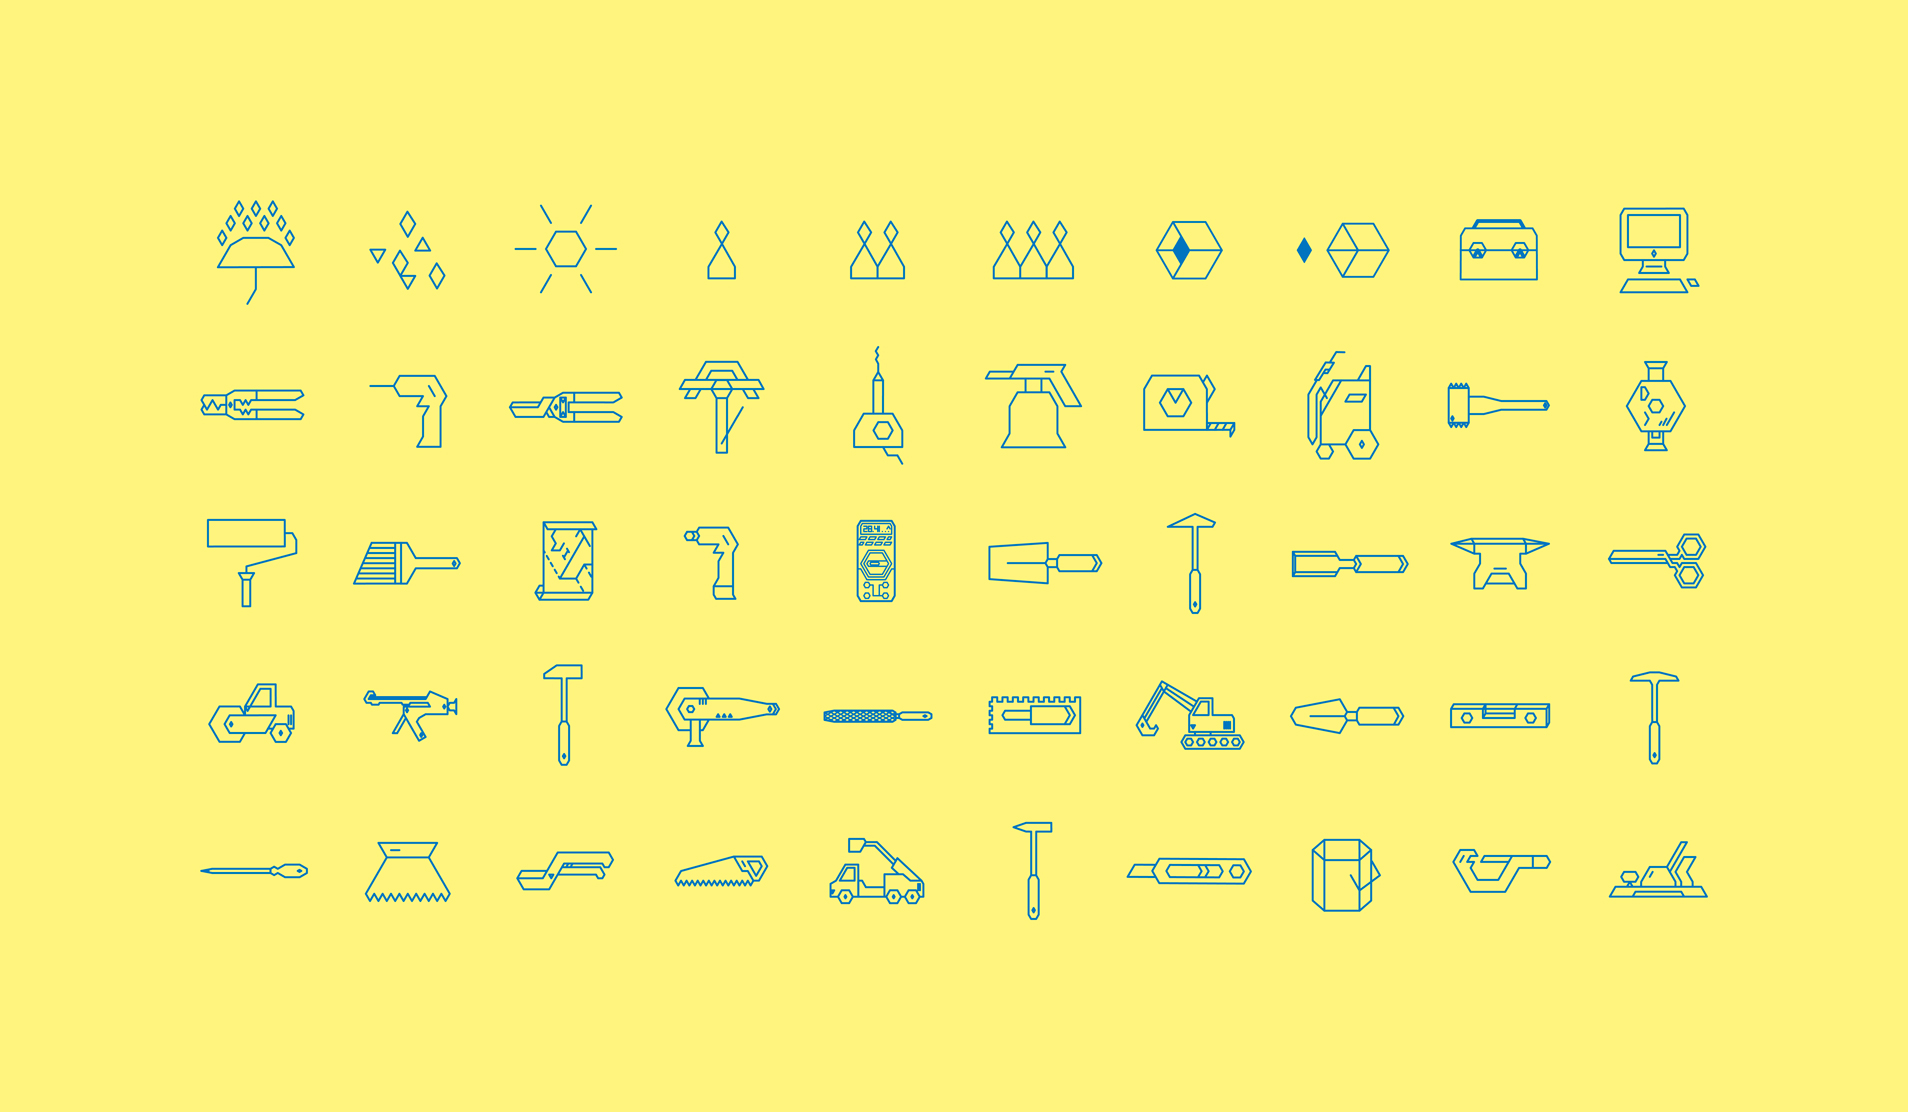 Icons of tools